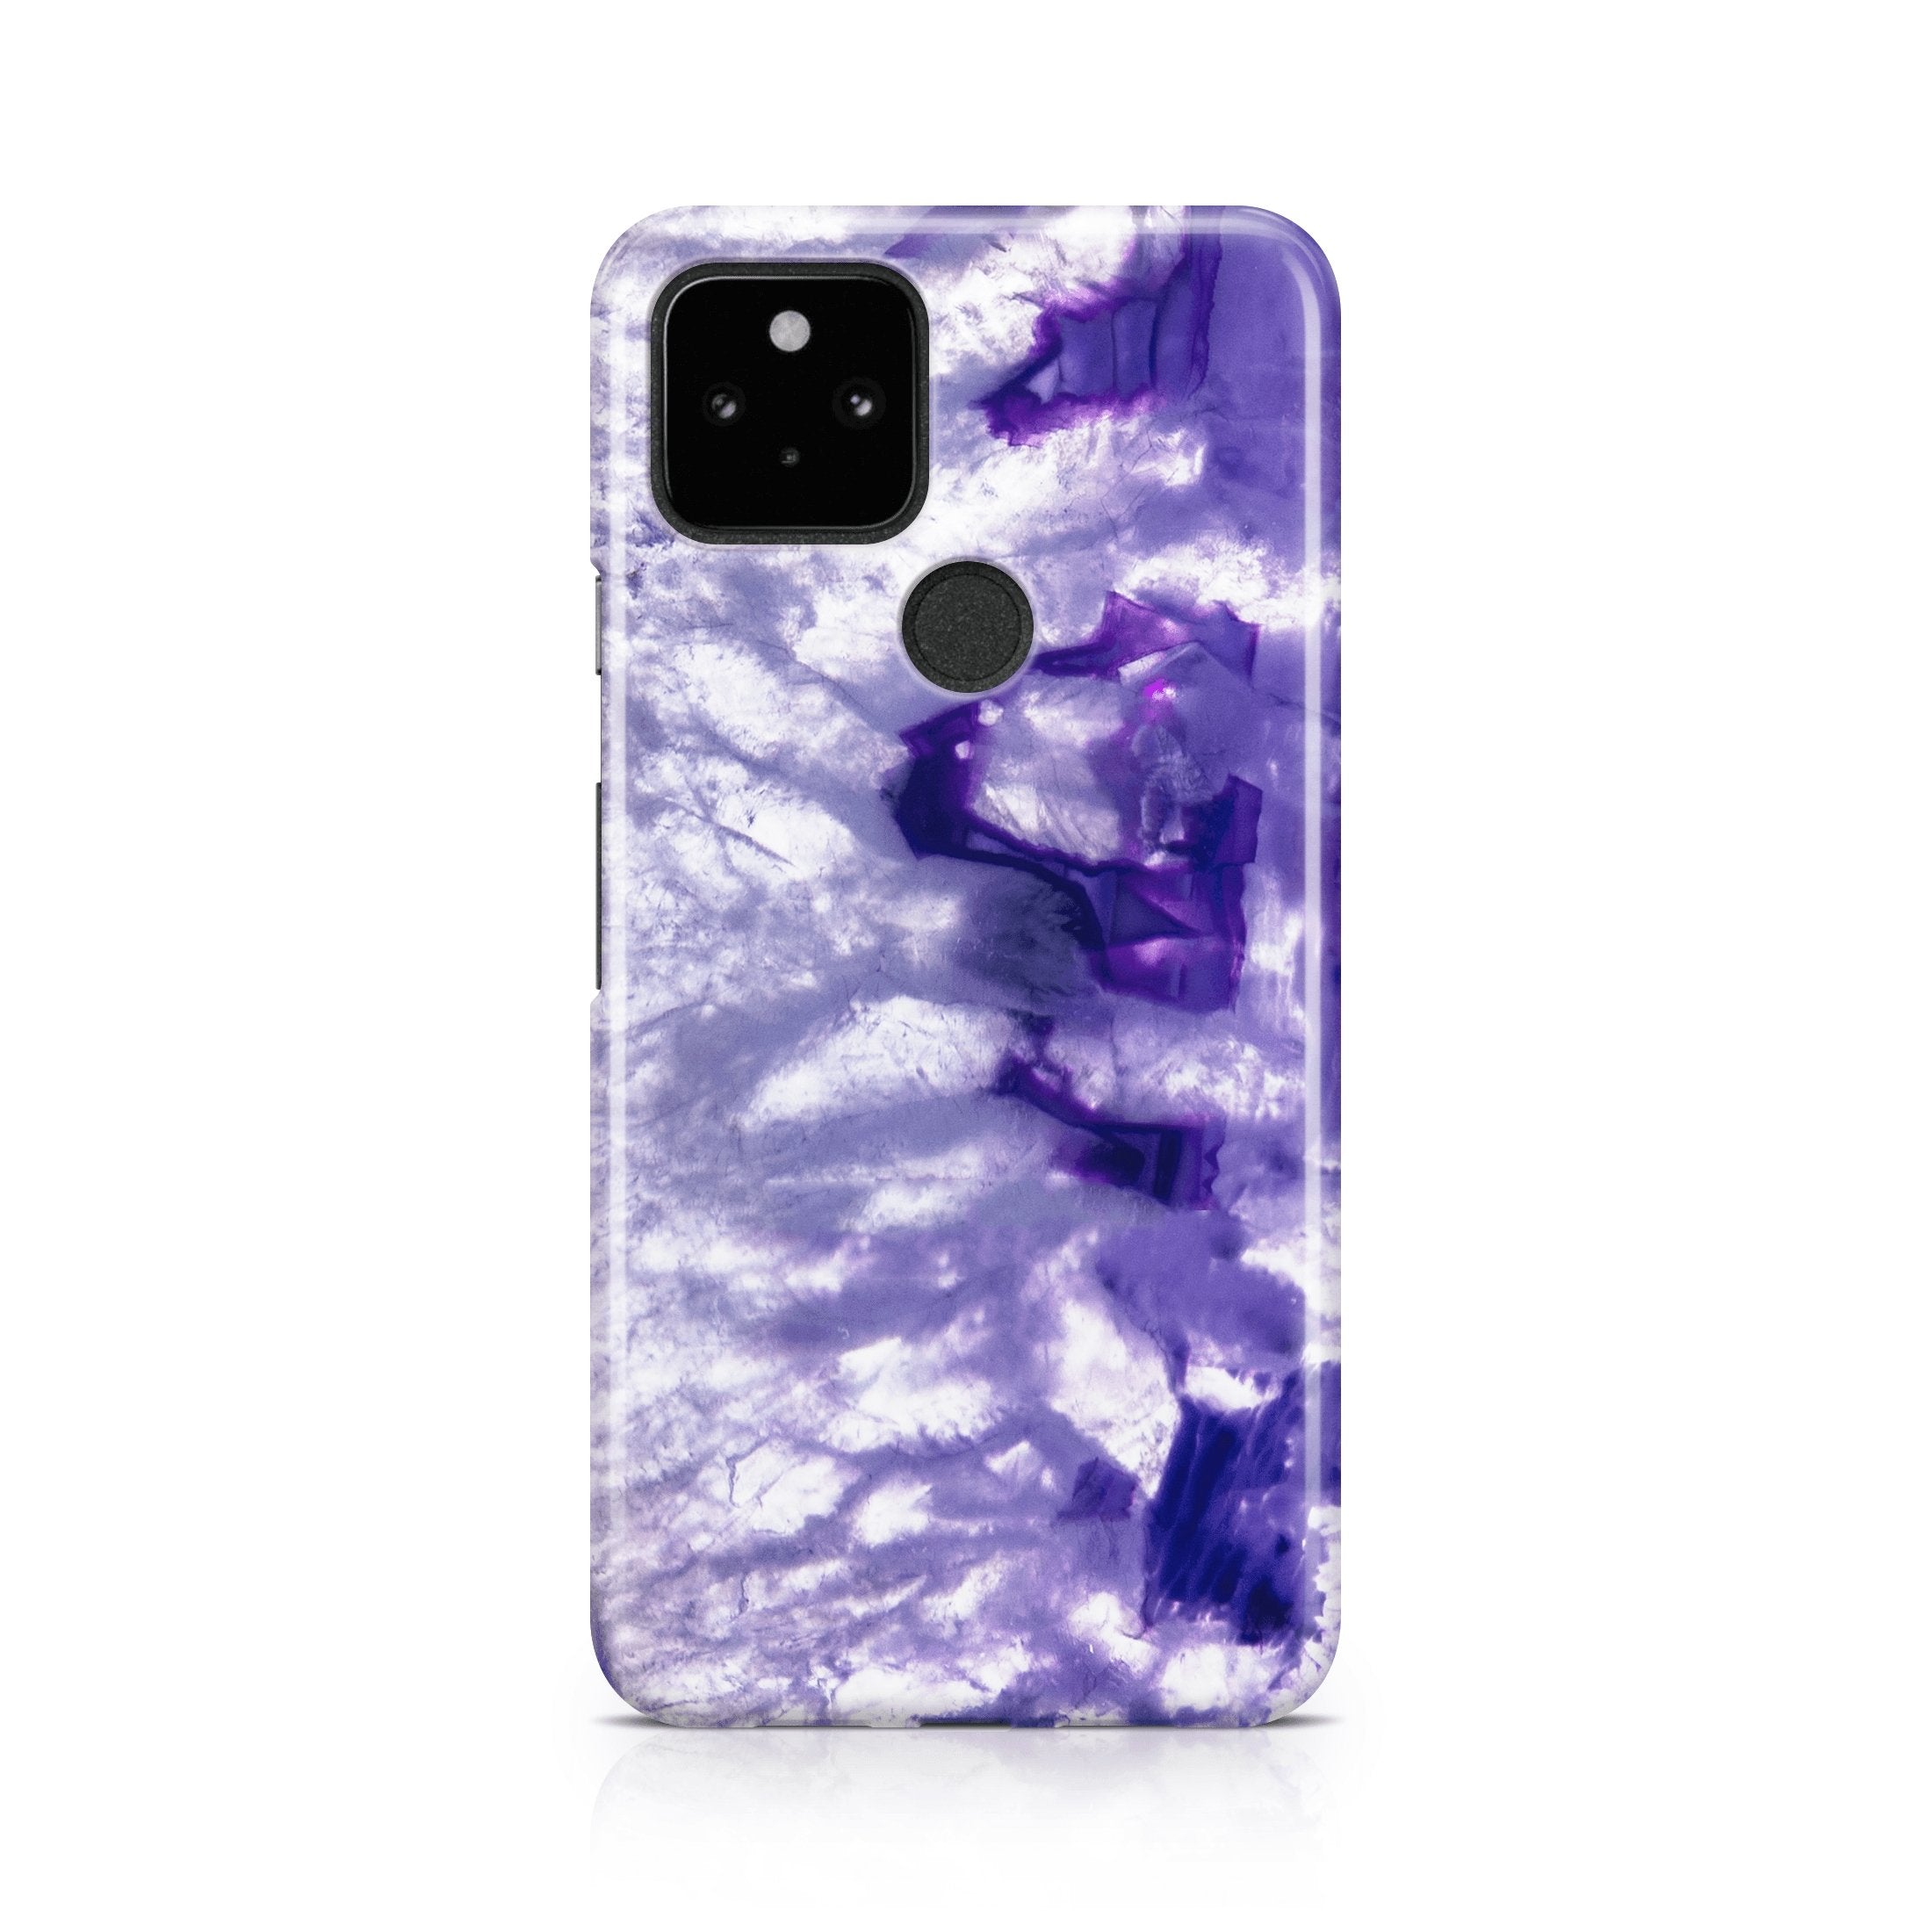 Purple Geode II - Google phone case designs by CaseSwagger